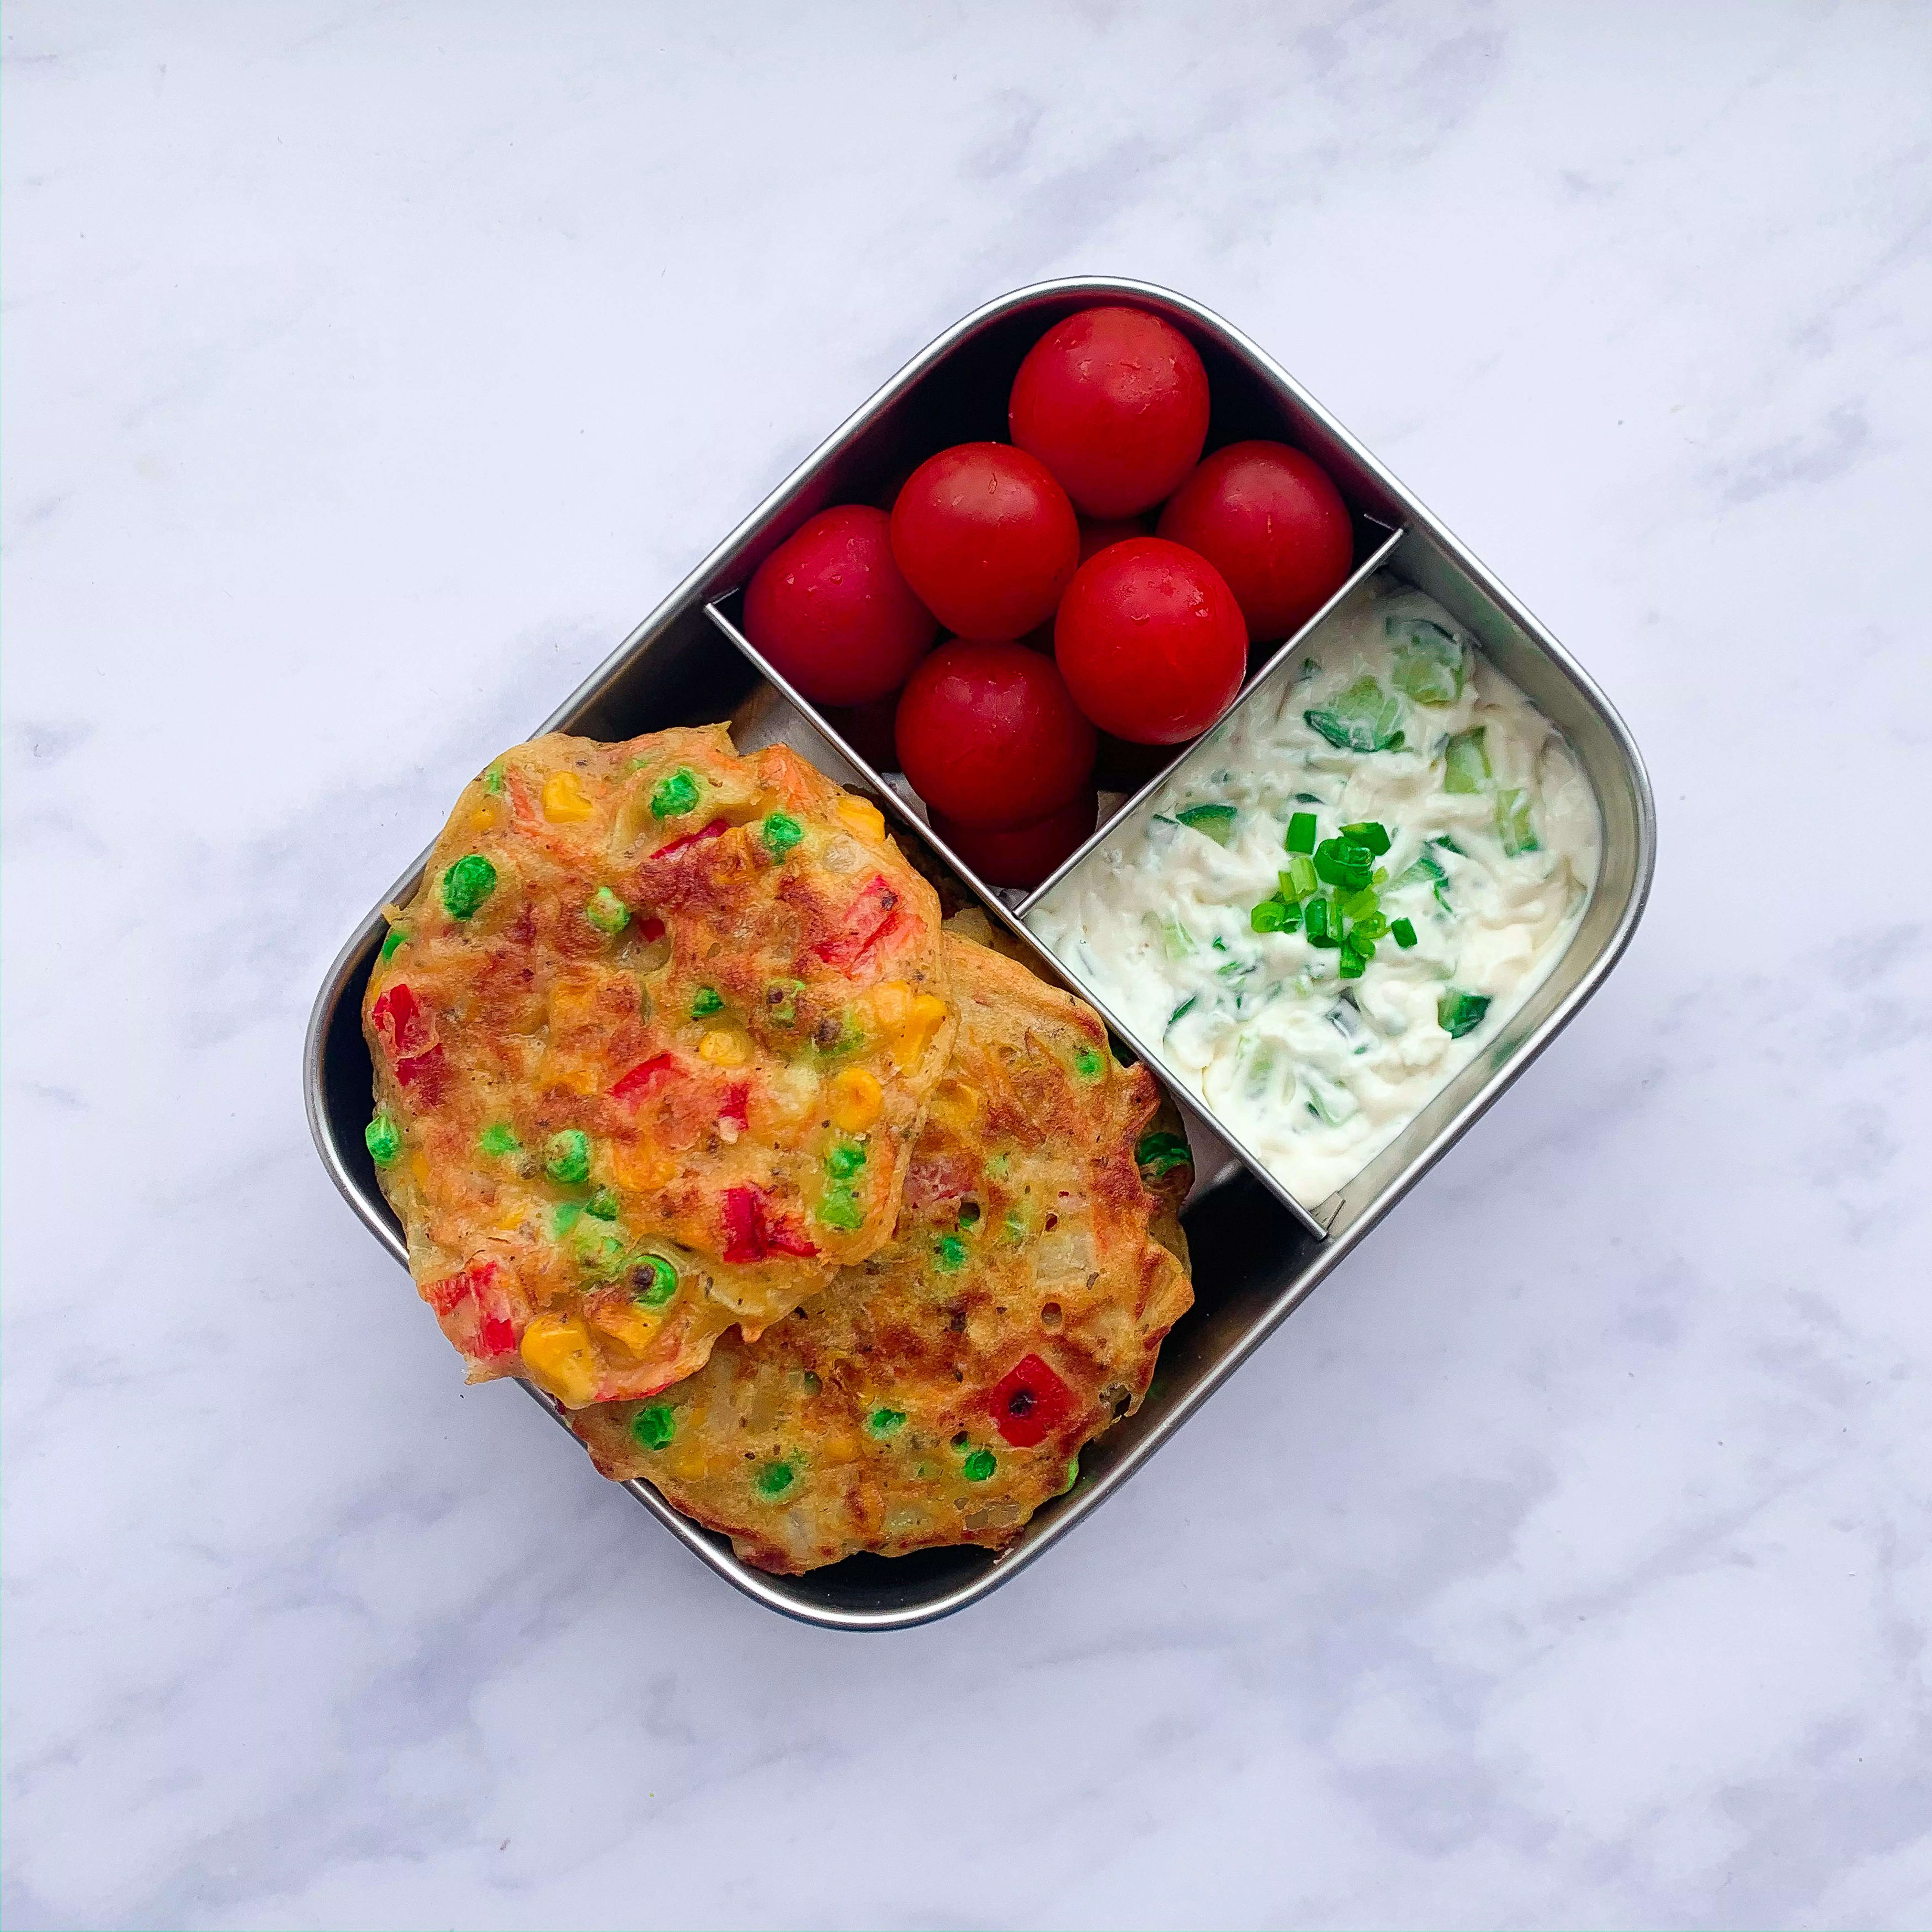 Veggie fritters with tomatoes and a tzatziki style dip